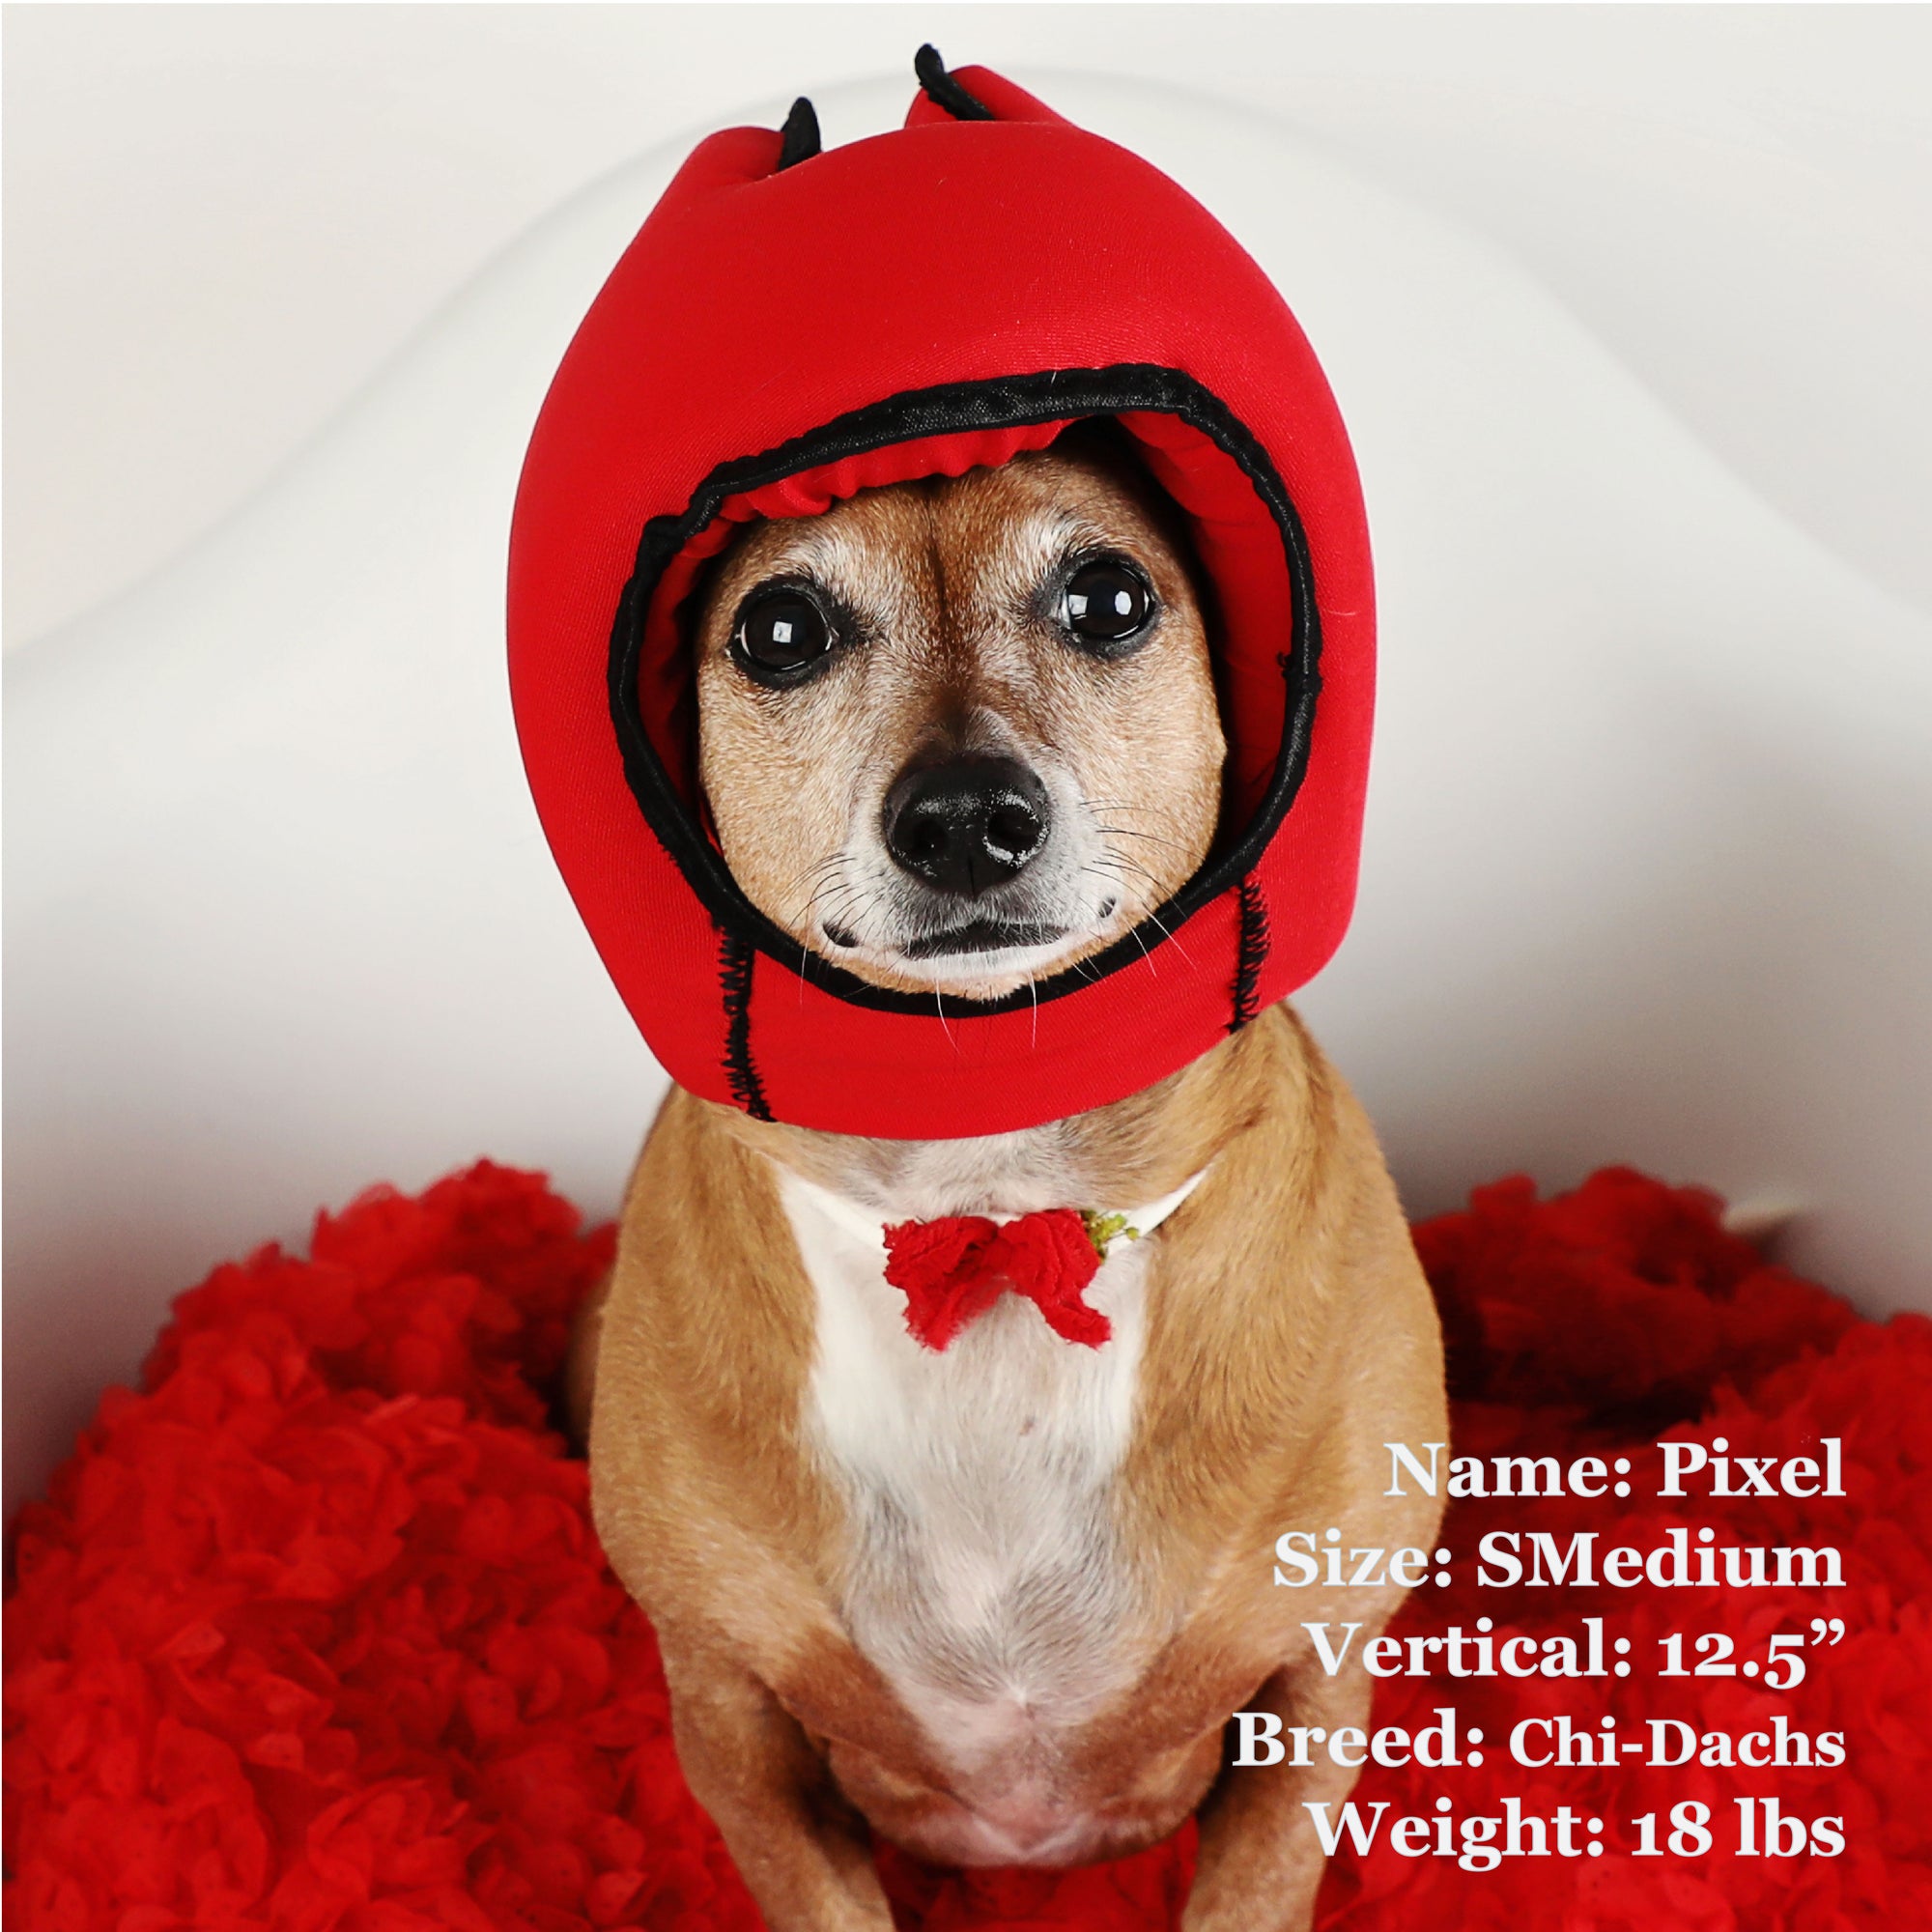 Pixel is a ChiWinnie in a SMedium Red PAWNIX Noise Cancelling Headset for dogs